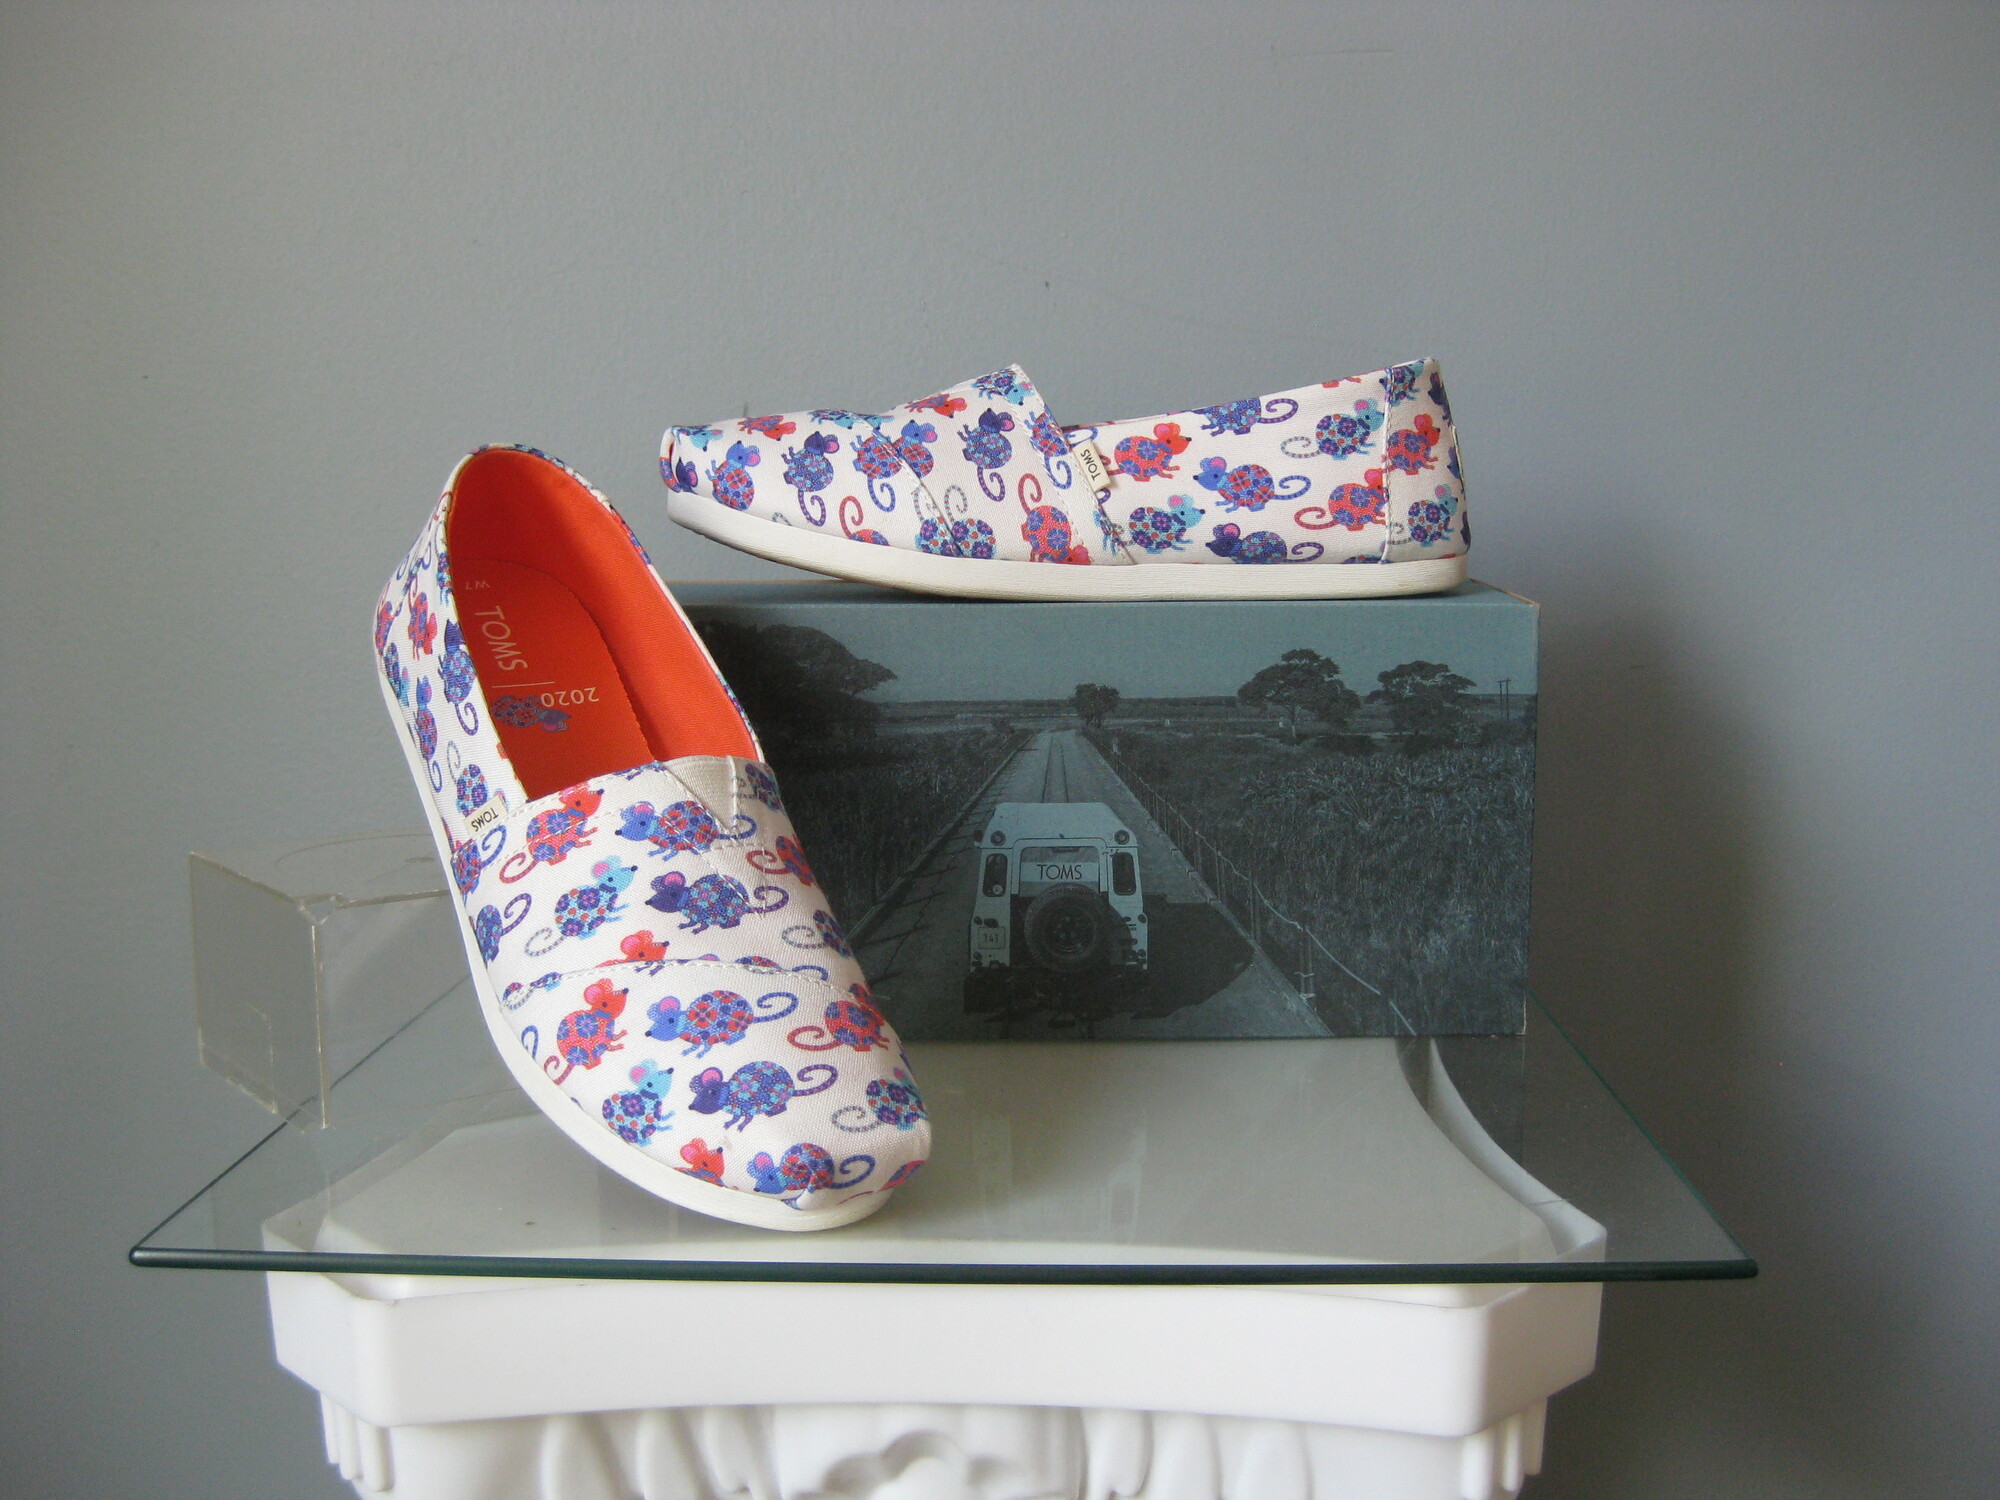 Toms Mouse Slipons, Blu/Wh, Size: 7

Iconic TOMS casual summer shoes in darling mouse print called year of the rat.
Mfr's color is Bright White
excellent condition.
size 7
comes with original box
 thanks for looking
#50316